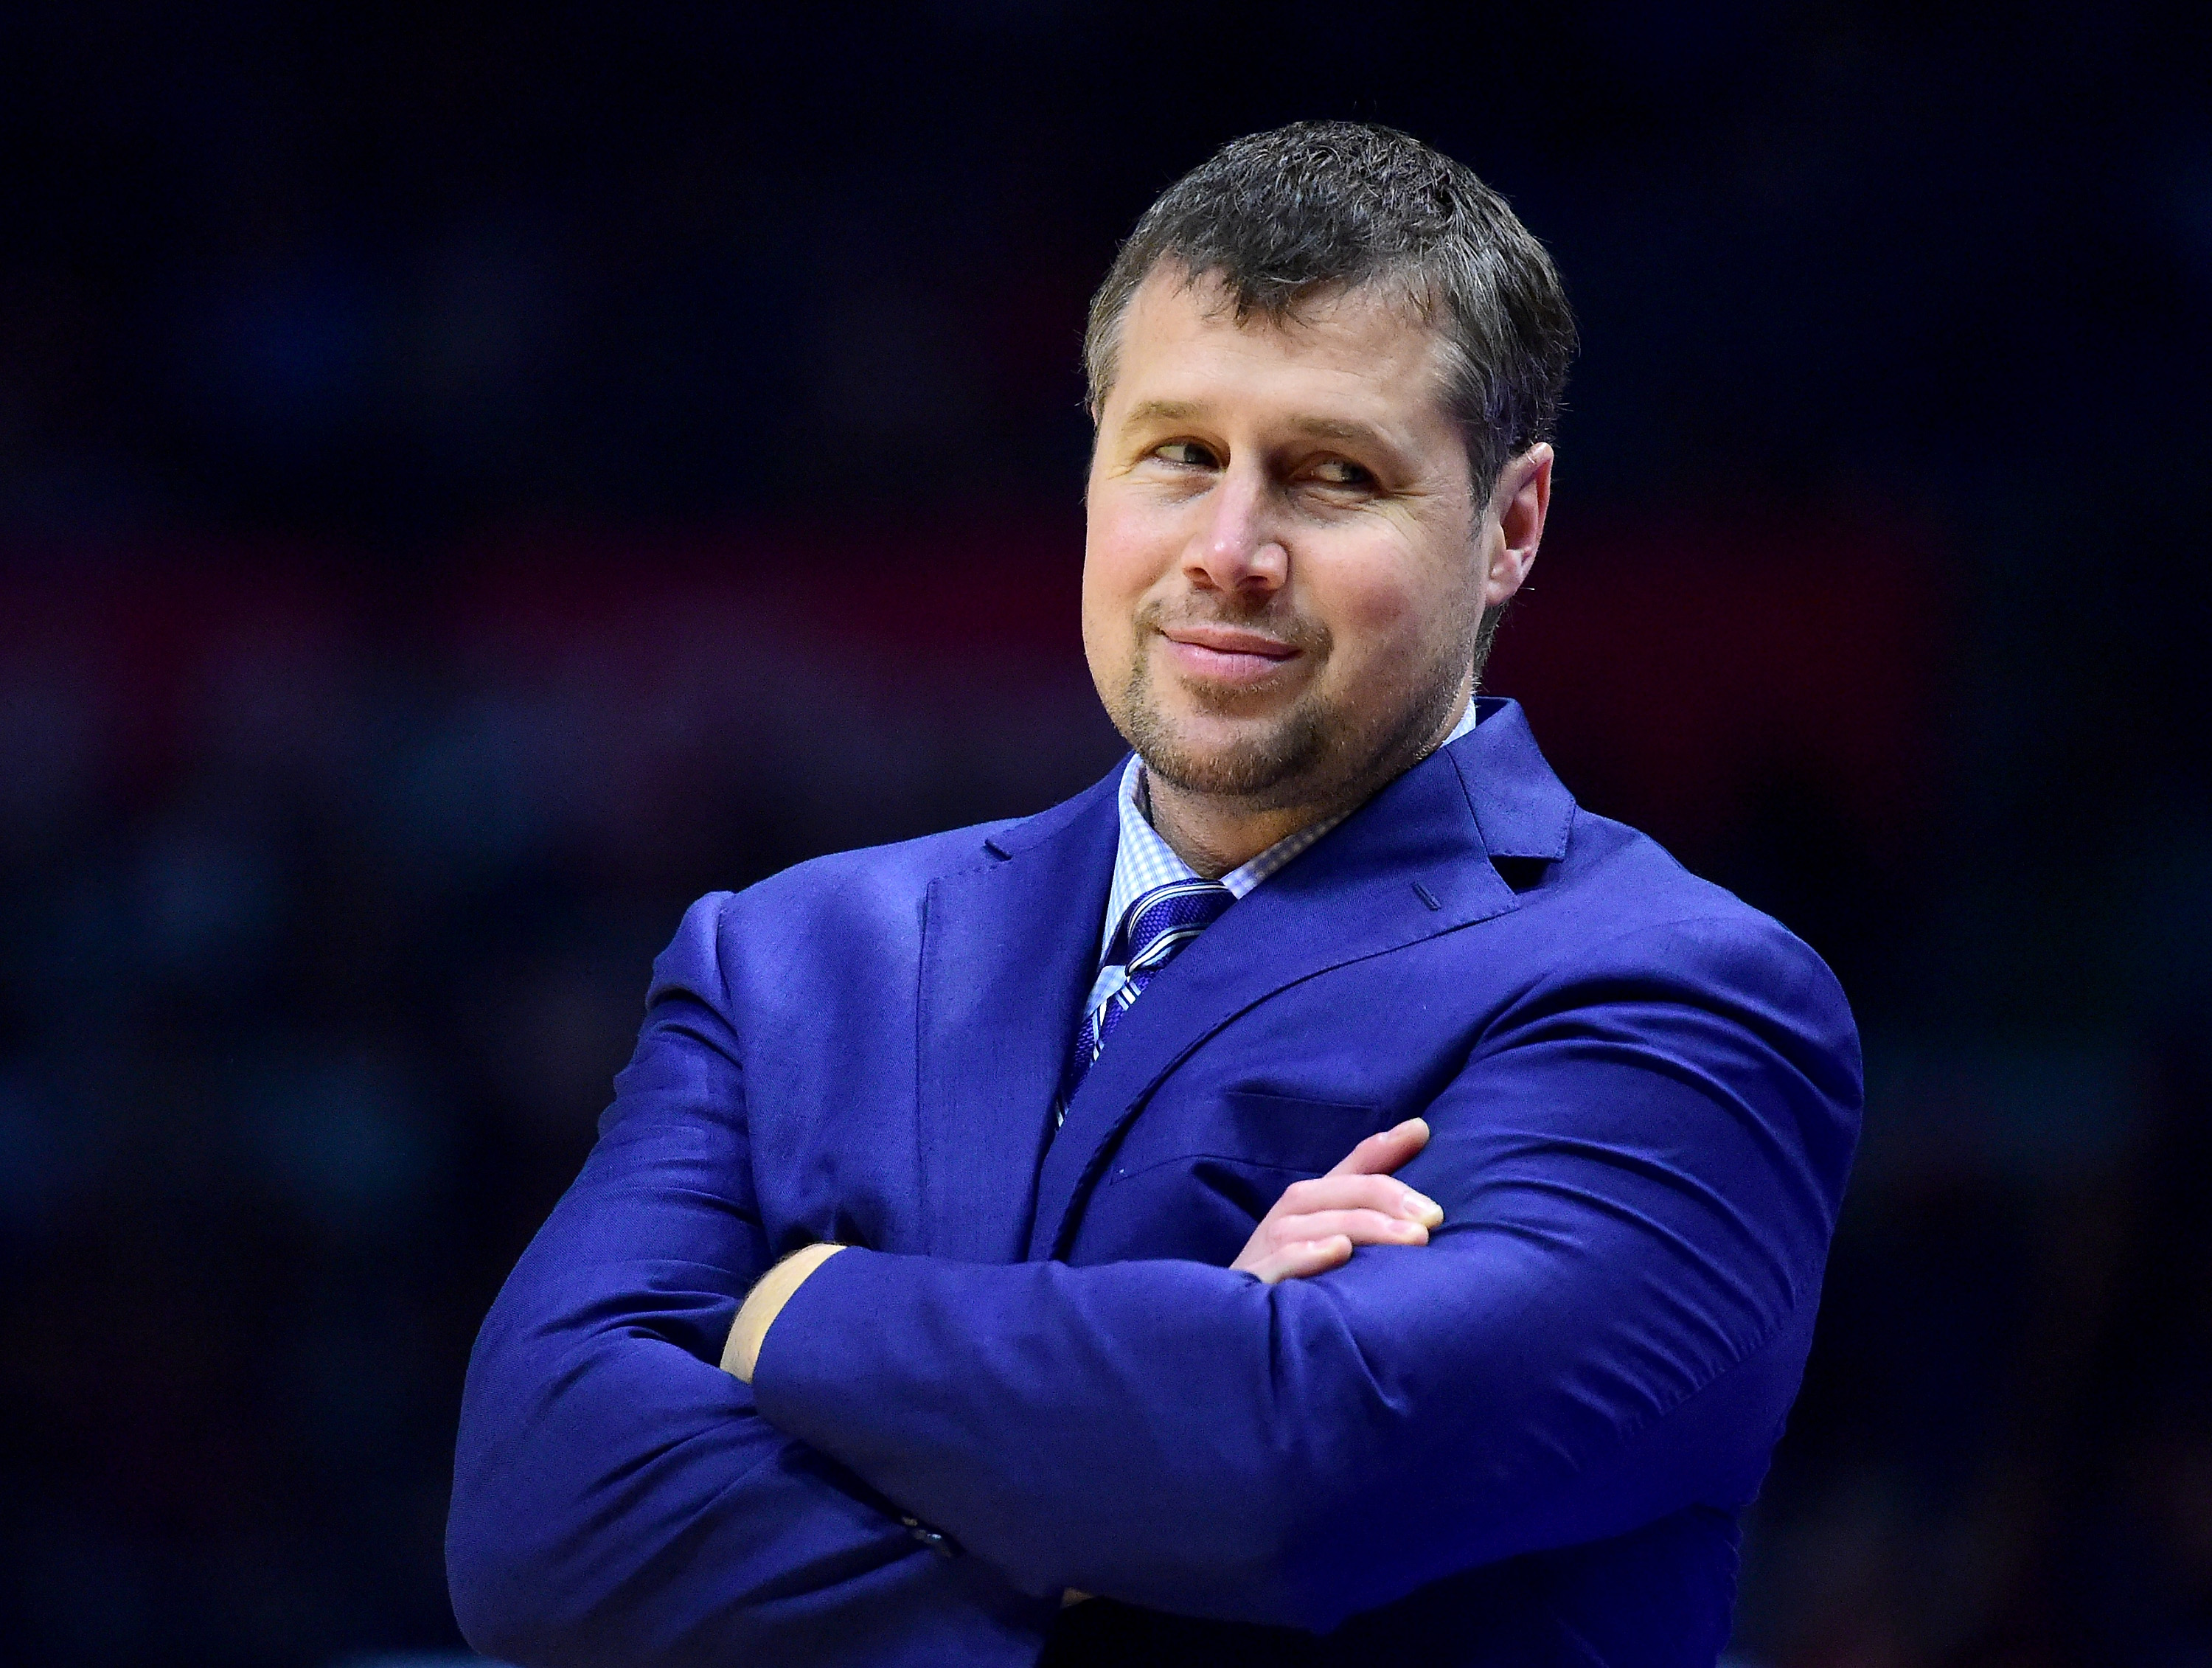 LOS ANGELES, CA - APRIL 12: Head coach David Joerger of the Sacramento Kings reacts during the first half against the LA Clippers at Staples Center on April 12, 2017 in Los Angeles, California. NOTE TO USER: User expressly acknowledges and agrees that, by downloading and or using this photograph, User is consenting to the terms and conditions of the Getty Images License Agreement.